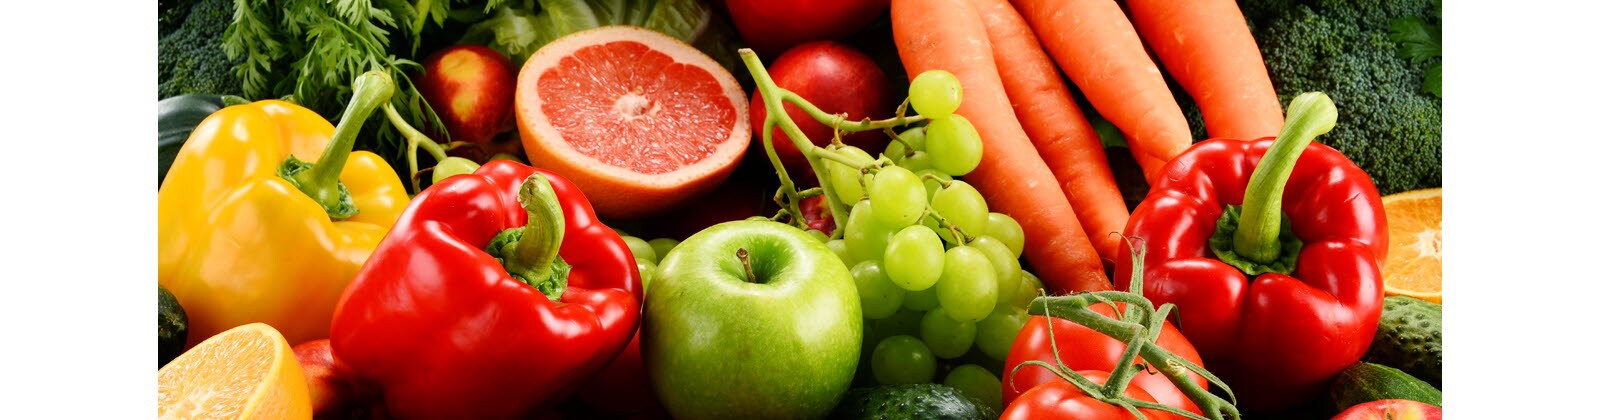 A selection of fresh, vibrantly colored fruit and vegetables.